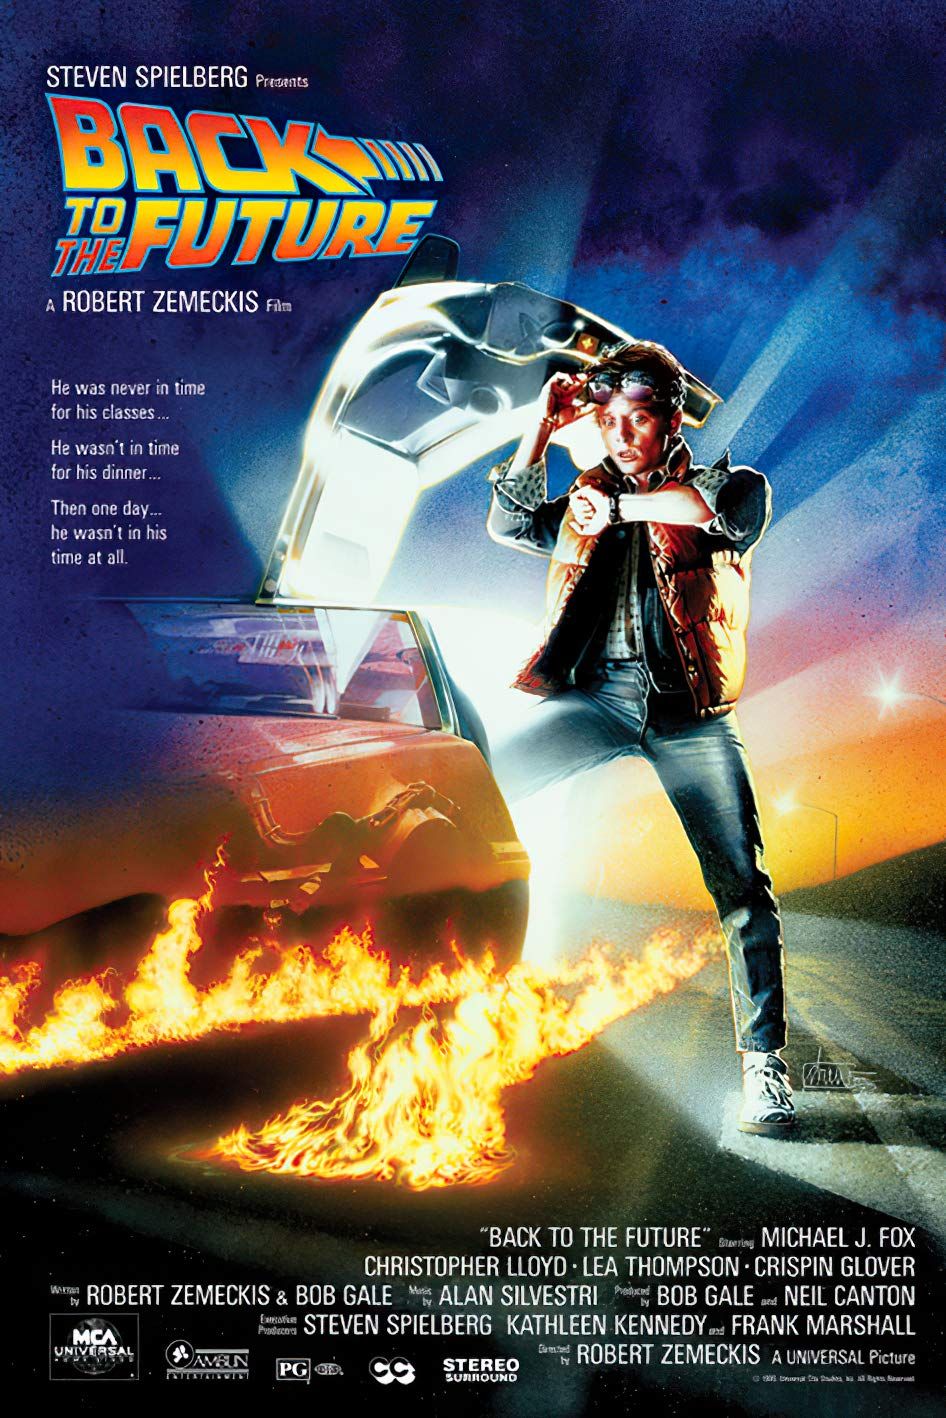 back-to-the-future-poster-1985